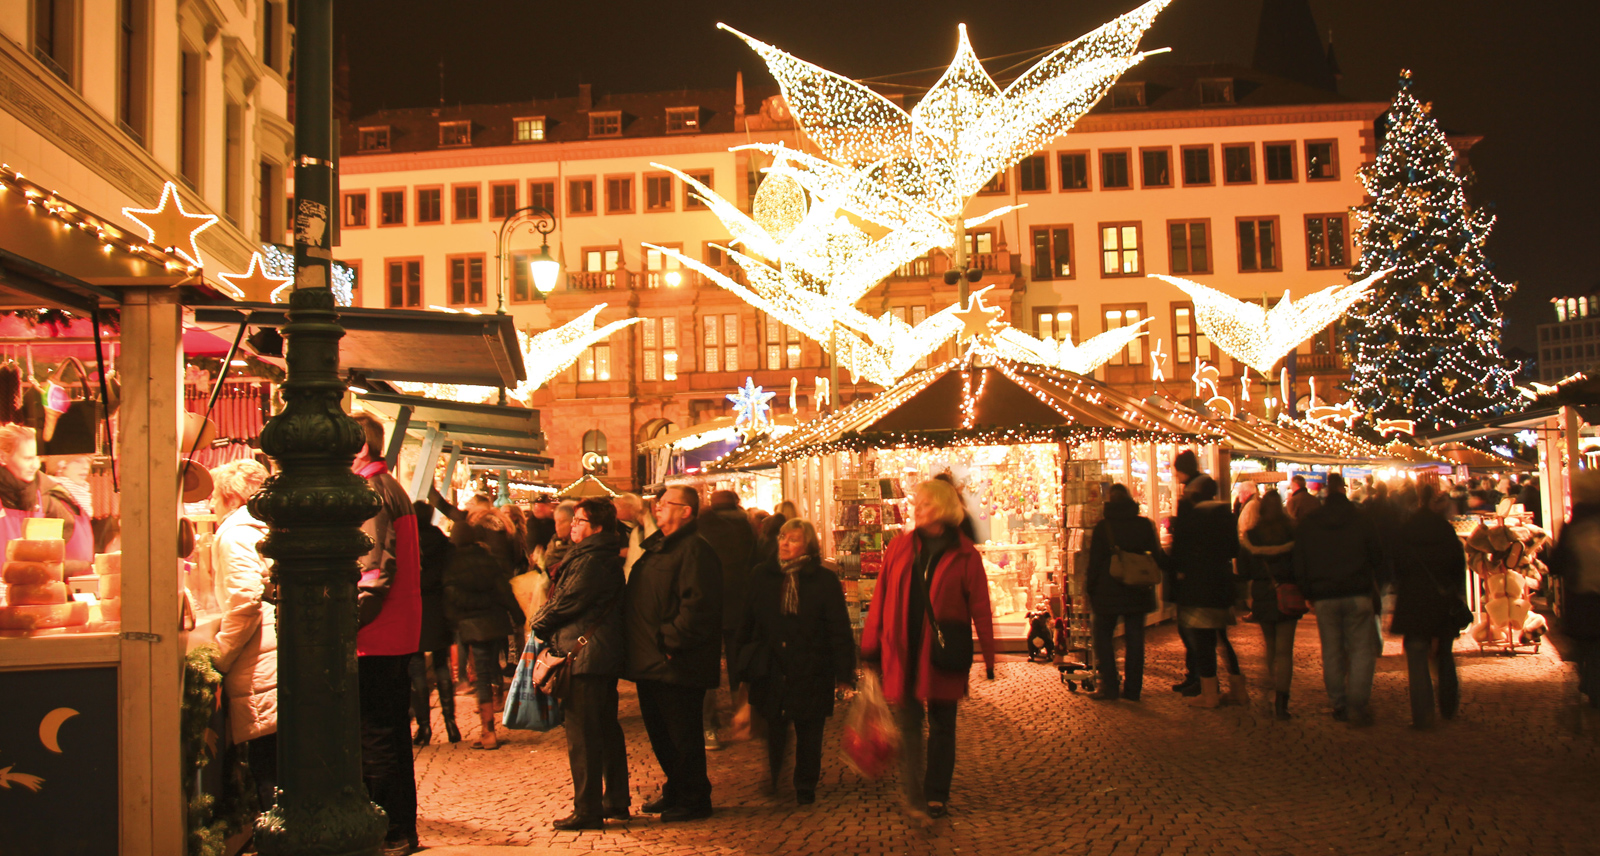 The Twinkling Star Christmas Market is one of the most popular in Germany